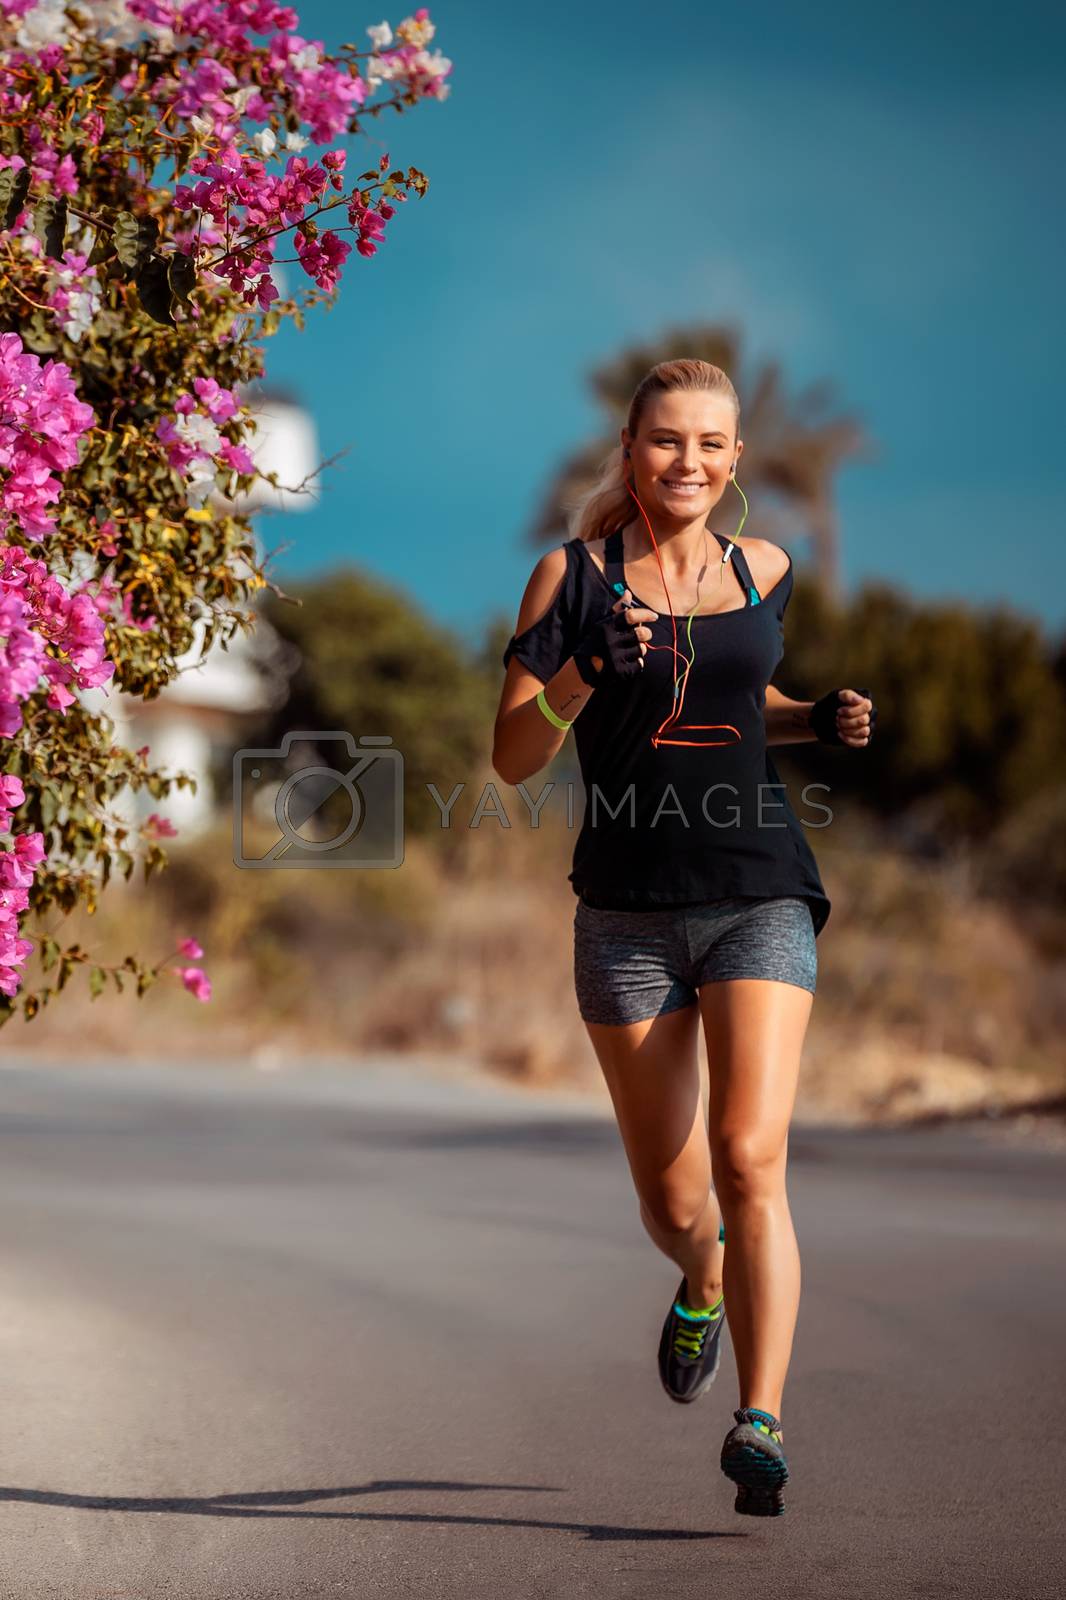 Royalty free image of Happy running woman by Anna_Omelchenko